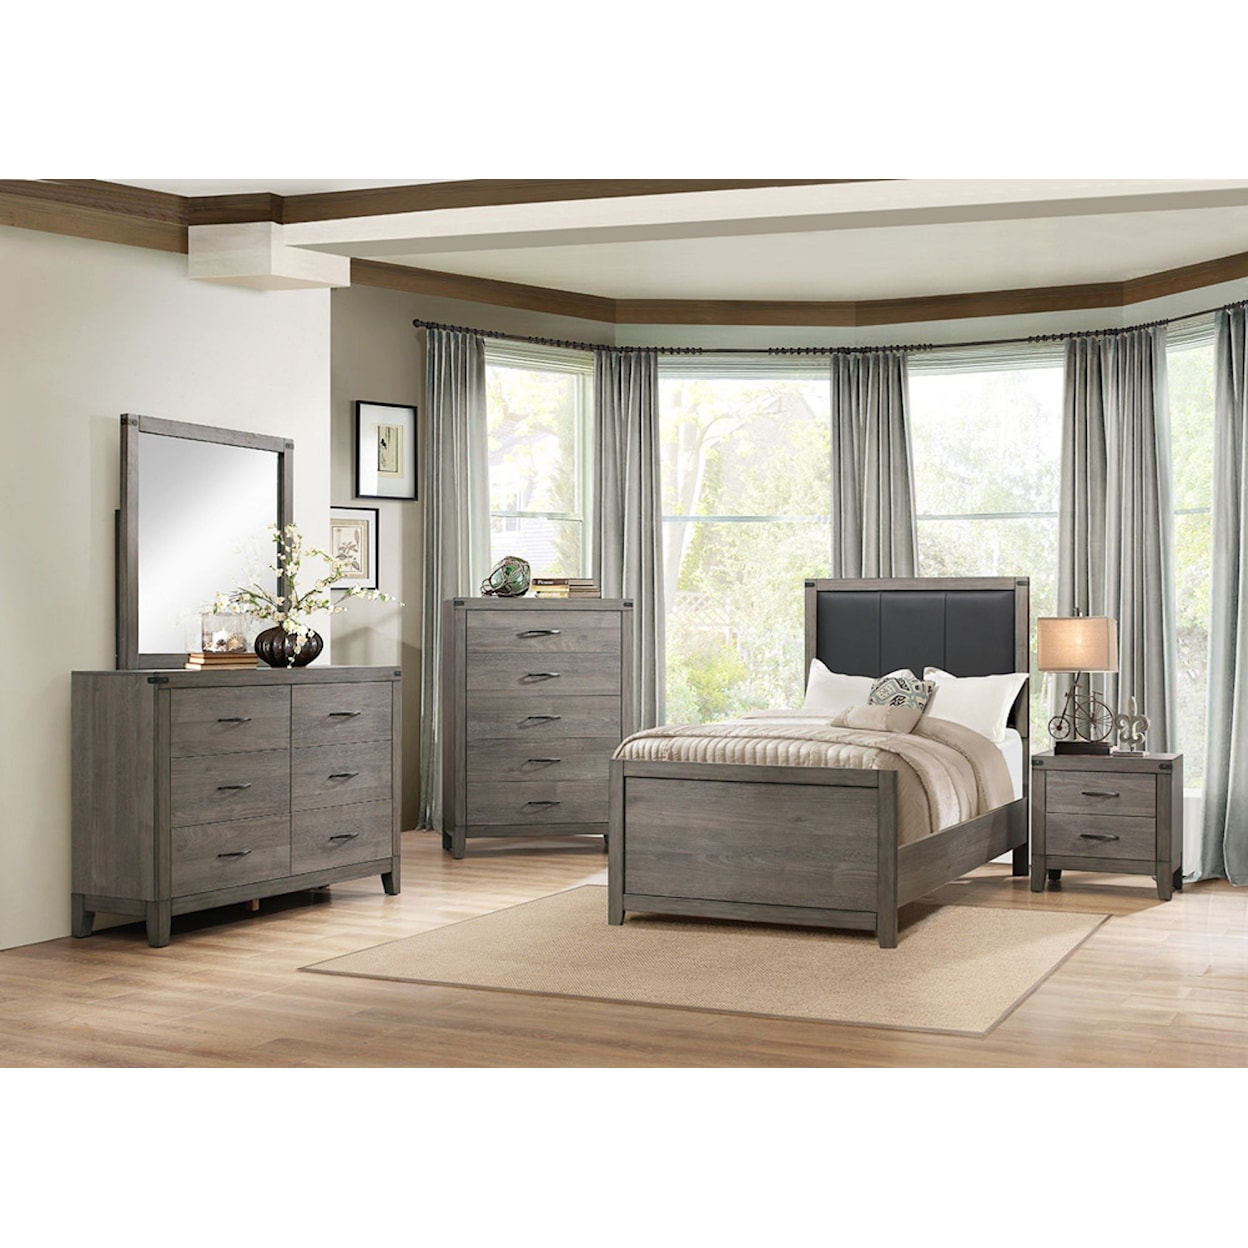 Homelegance Furniture 2042 Contemporary Full Bed